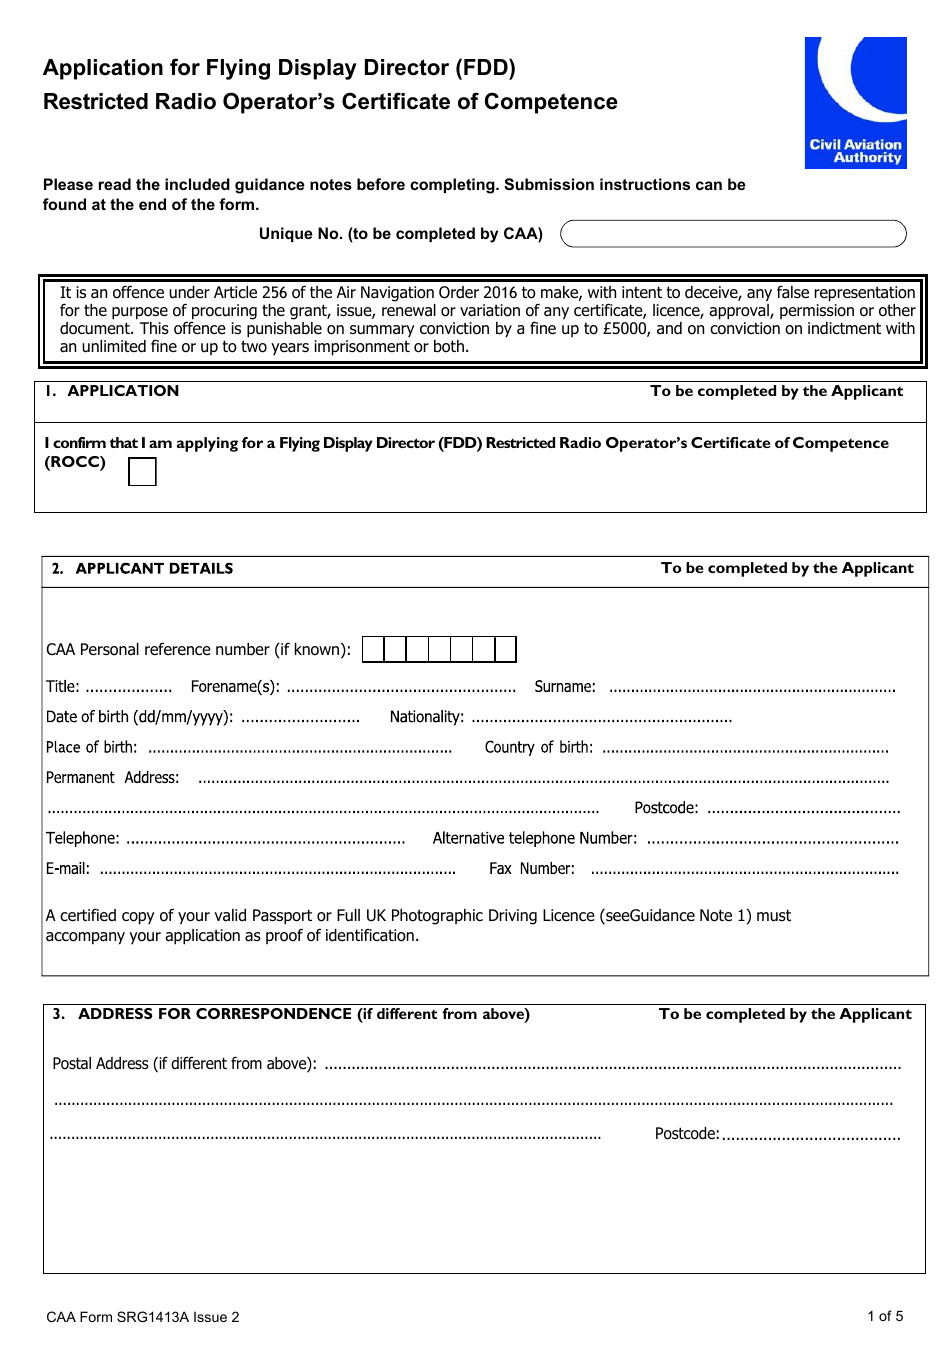 CAA Form SRG1413A Application for Flying Display Director (Fdd) Restricted Radio Operators Certificate of Competence - United Kingdom, Page 1